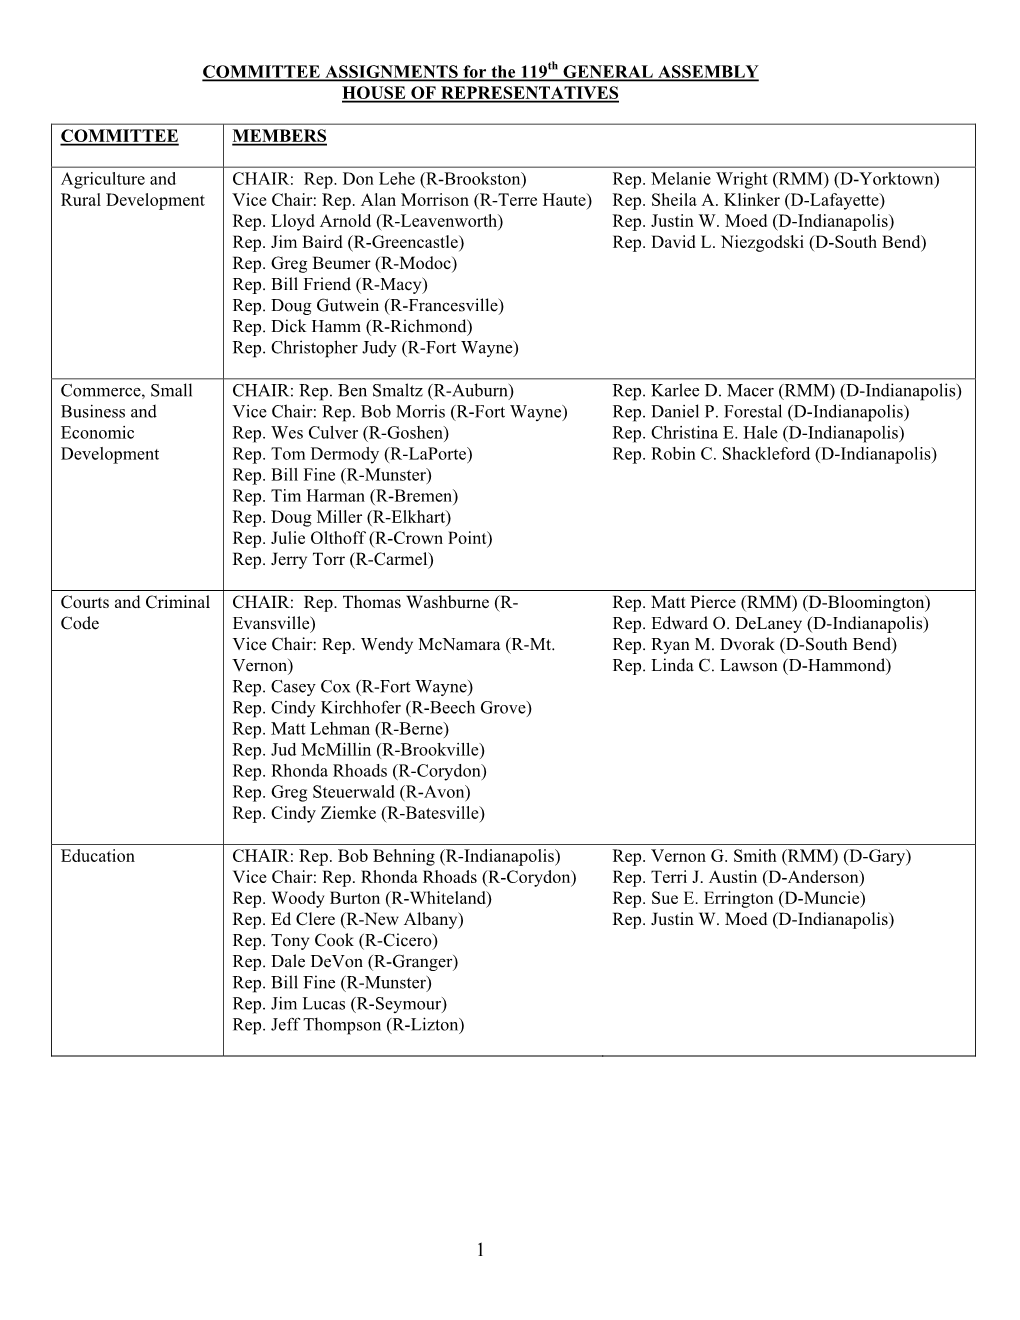 COMMITTEE ASSIGNMENTS for the 119Th GENERAL ASSEMBLY HOUSE of REPRESENTATIVES